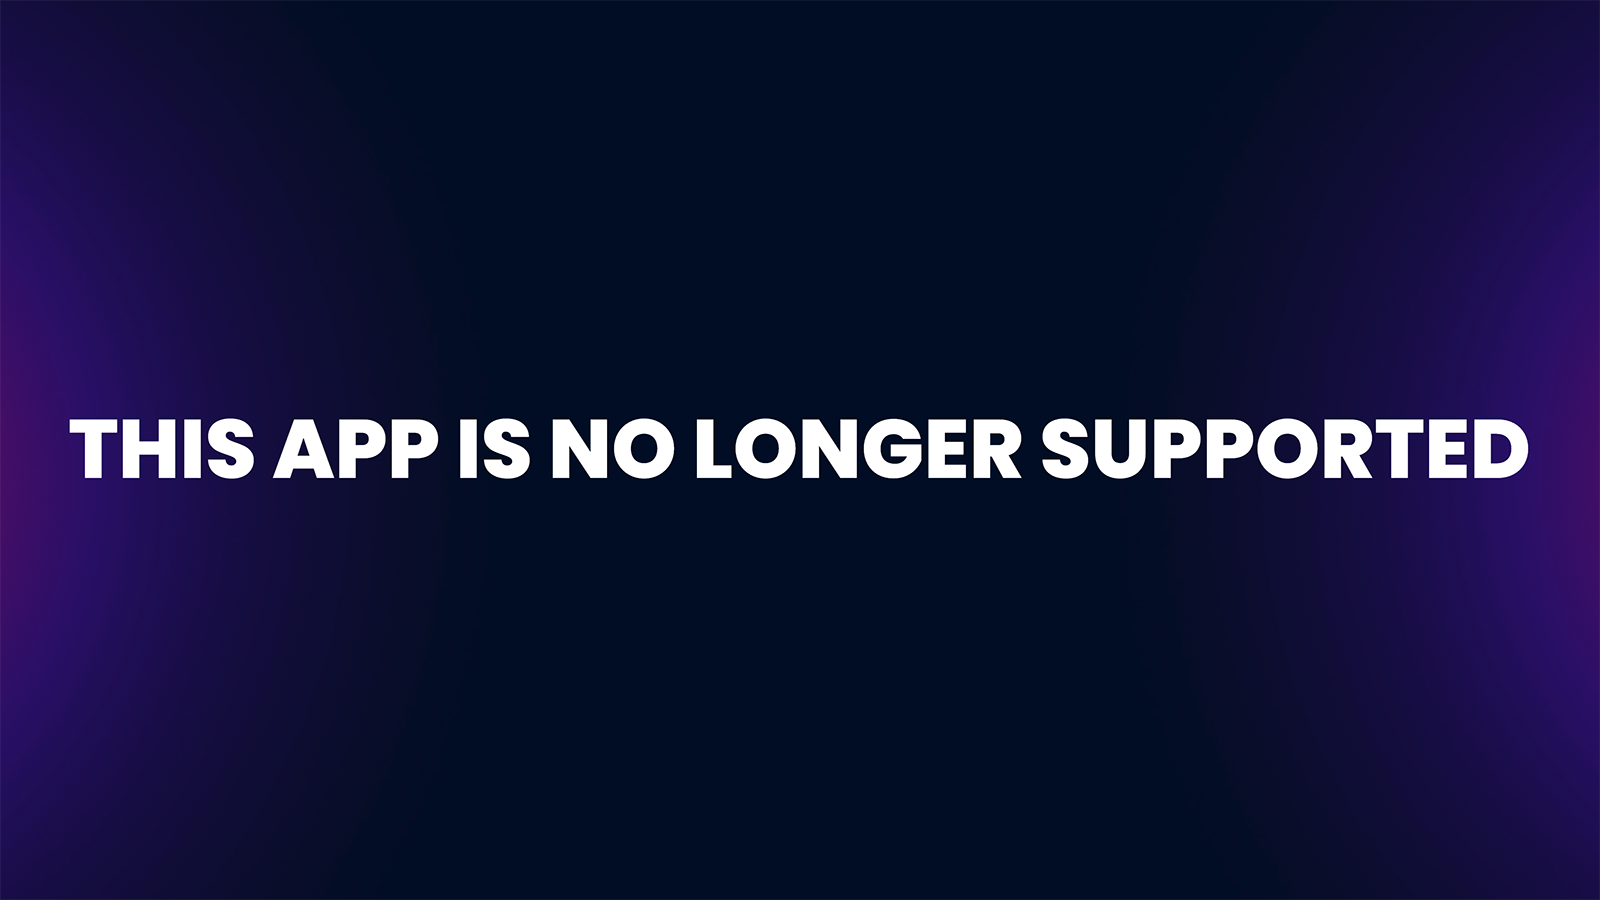 THIS APP IS NOT CURRENTLY SUPPORTED